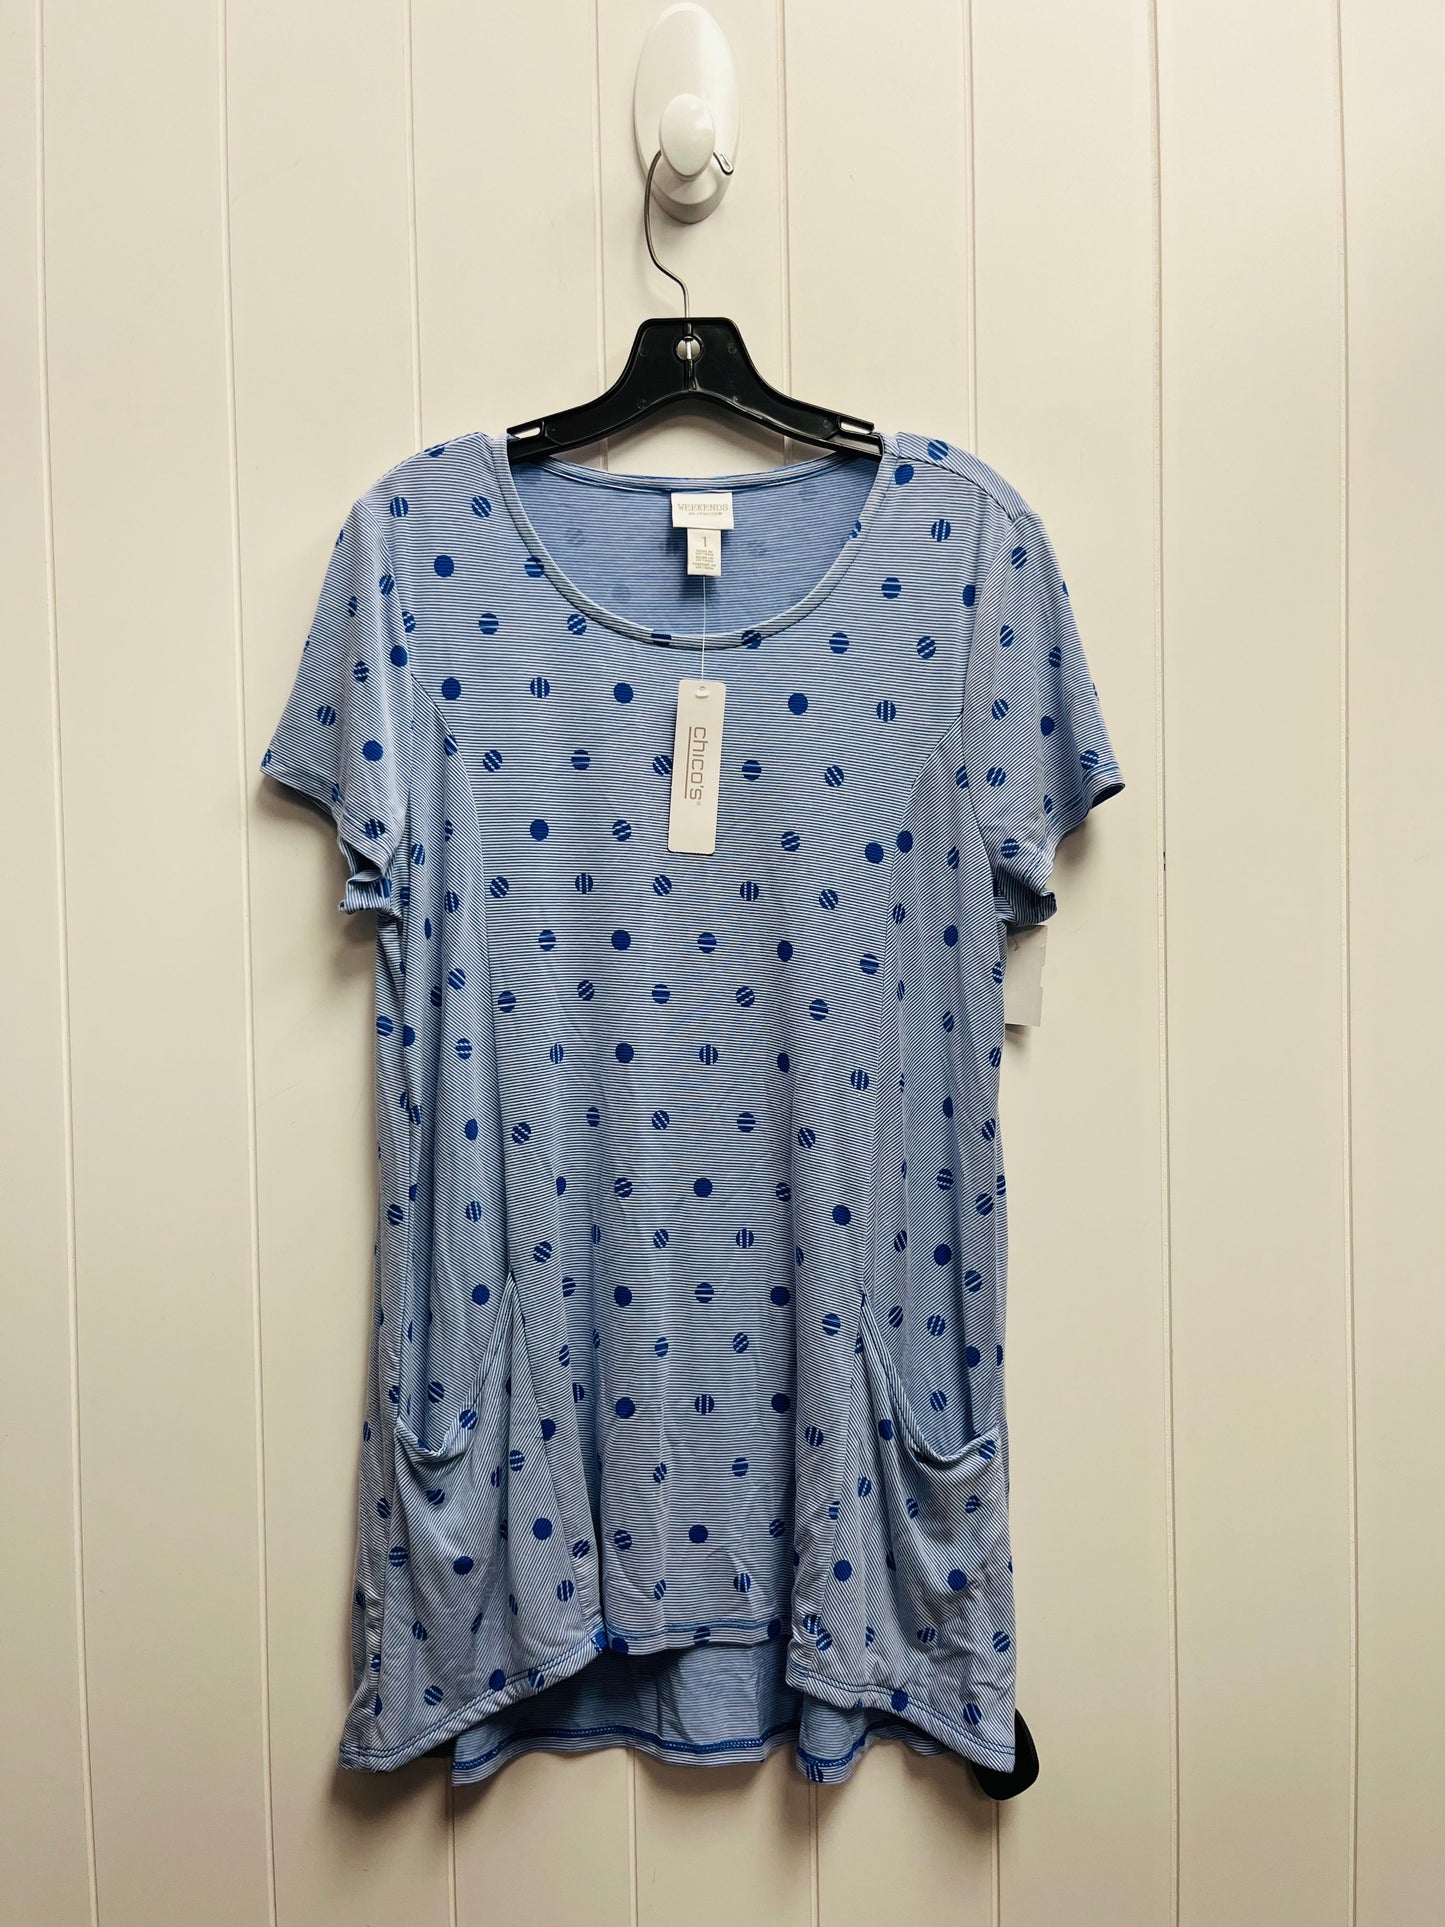 Blue & White Top Short Sleeve Chicos, Size M